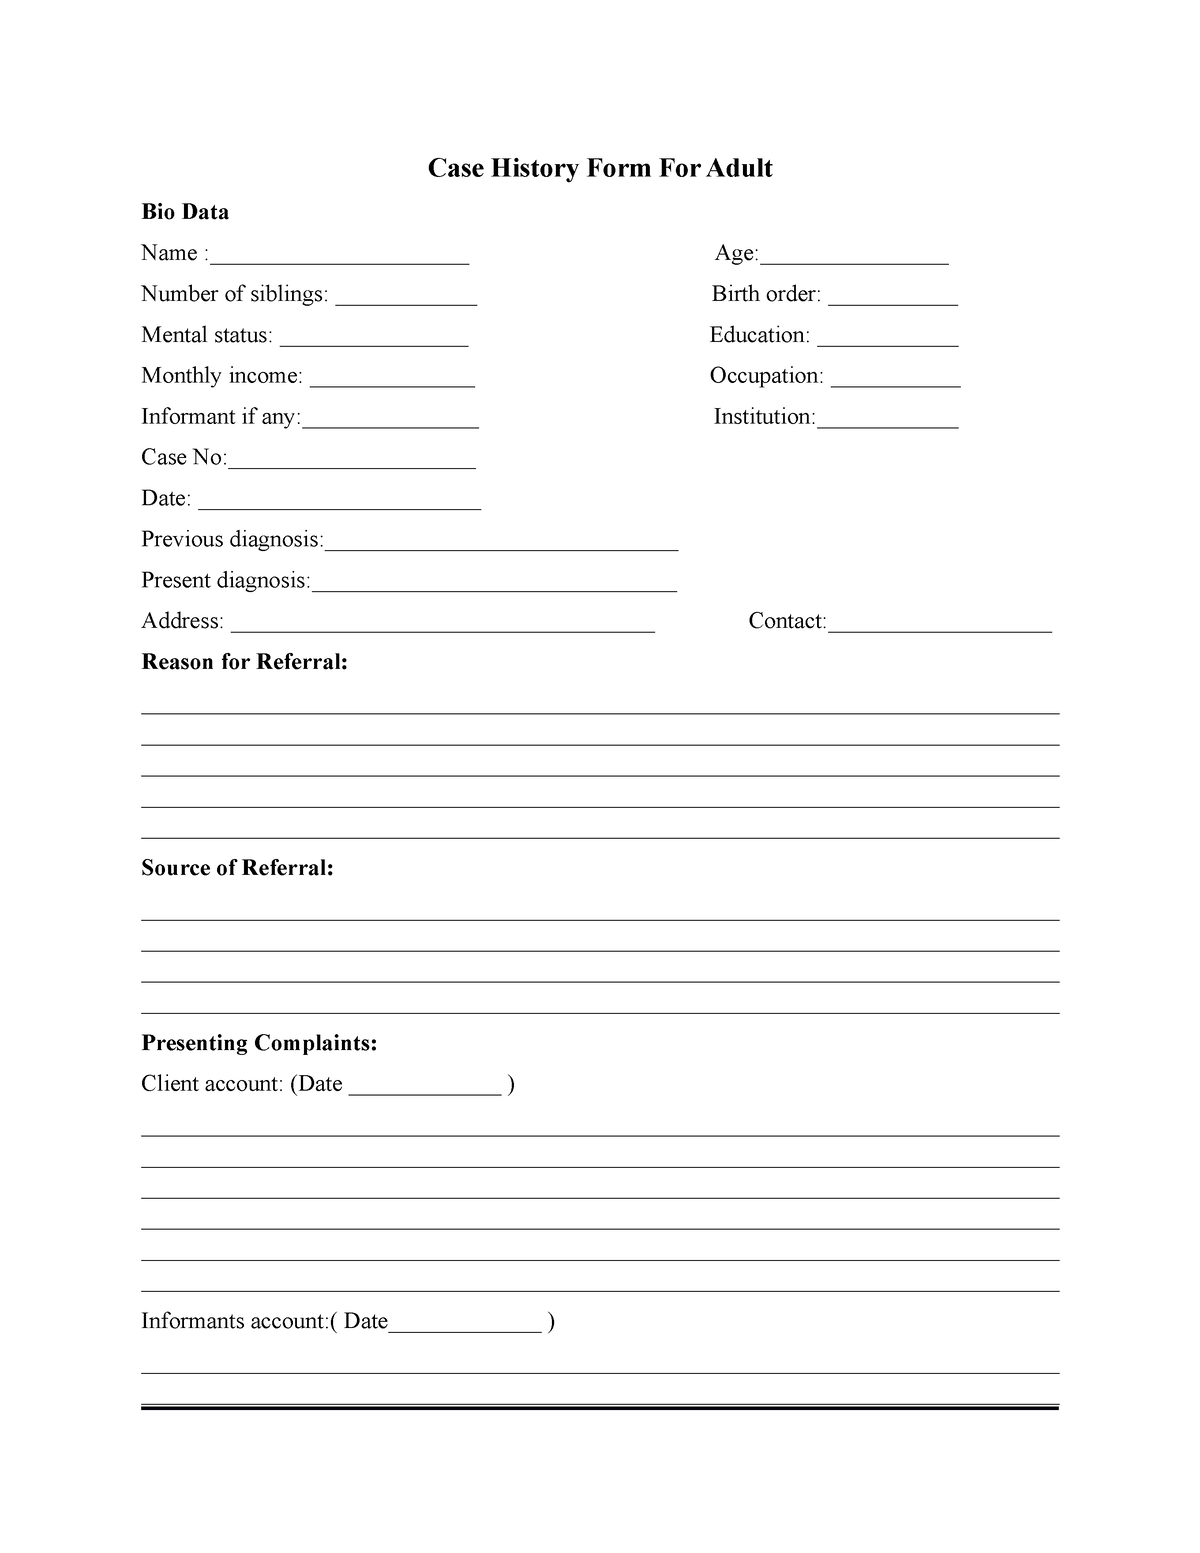 case-history-form-for-adult-case-history-form-for-adult-bio-data-name